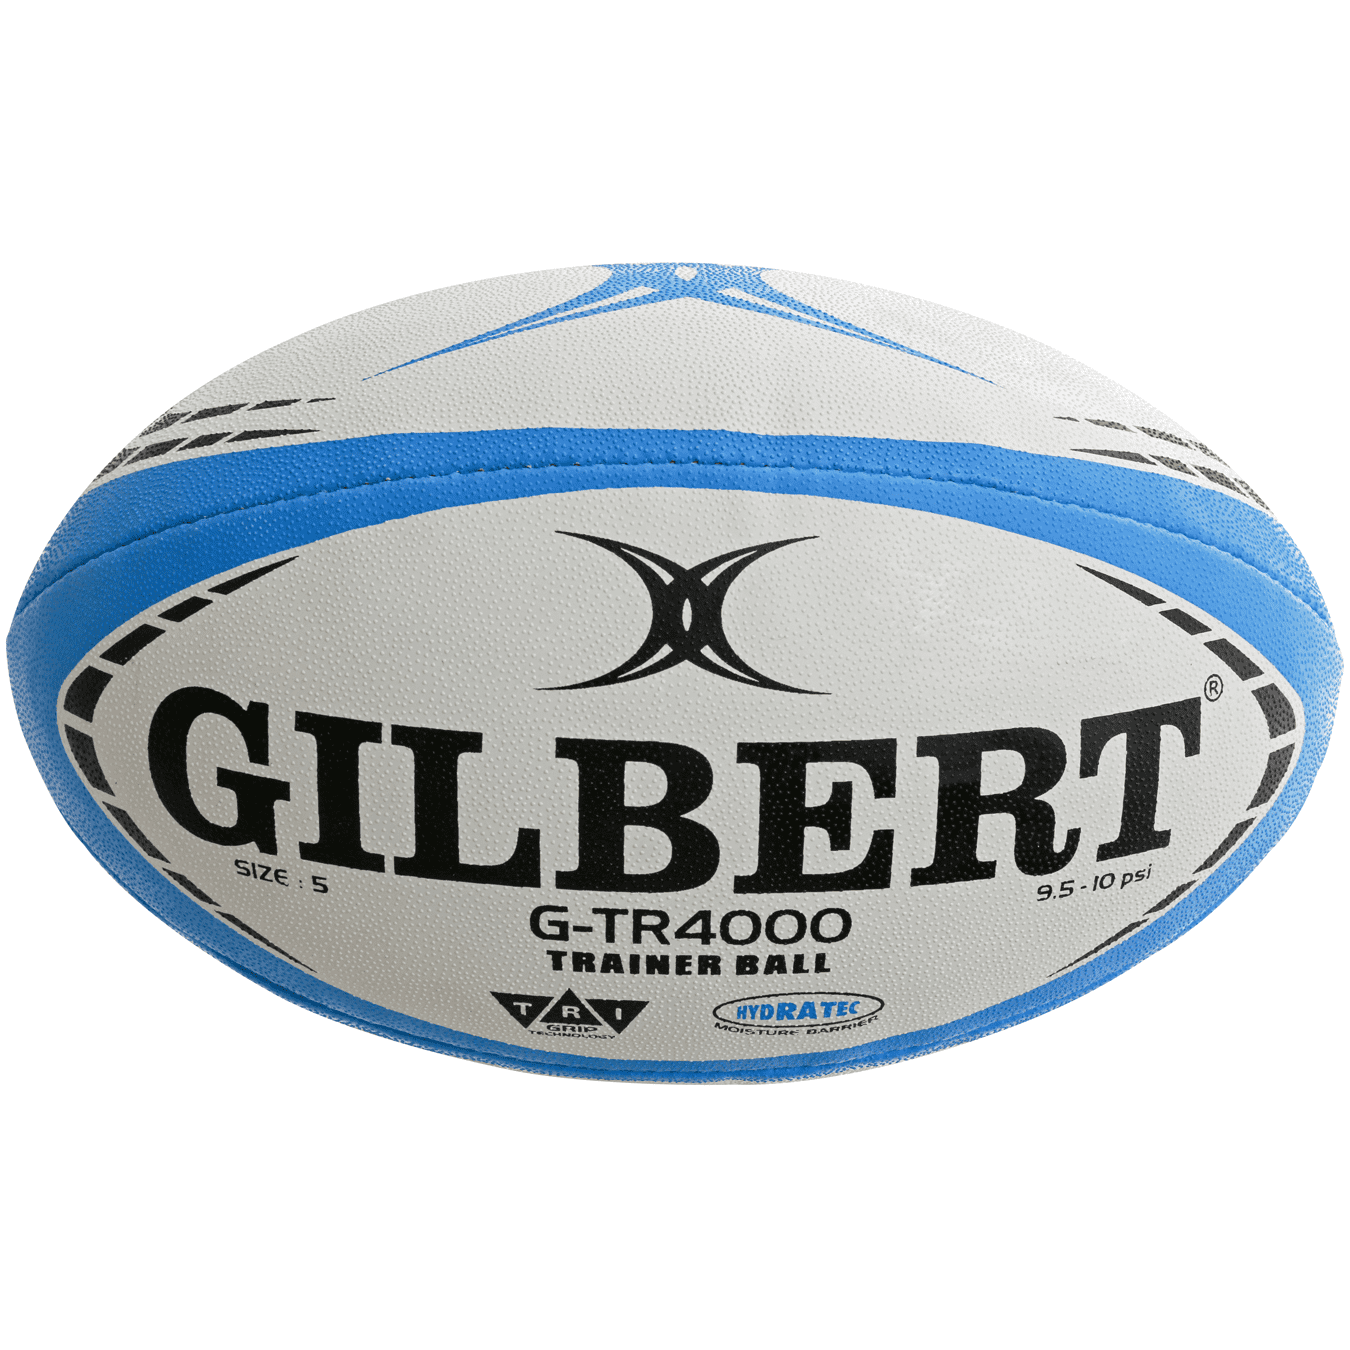 Clearance Gilbert Rugby Vapour Gym Short Black/Navy various sizes 